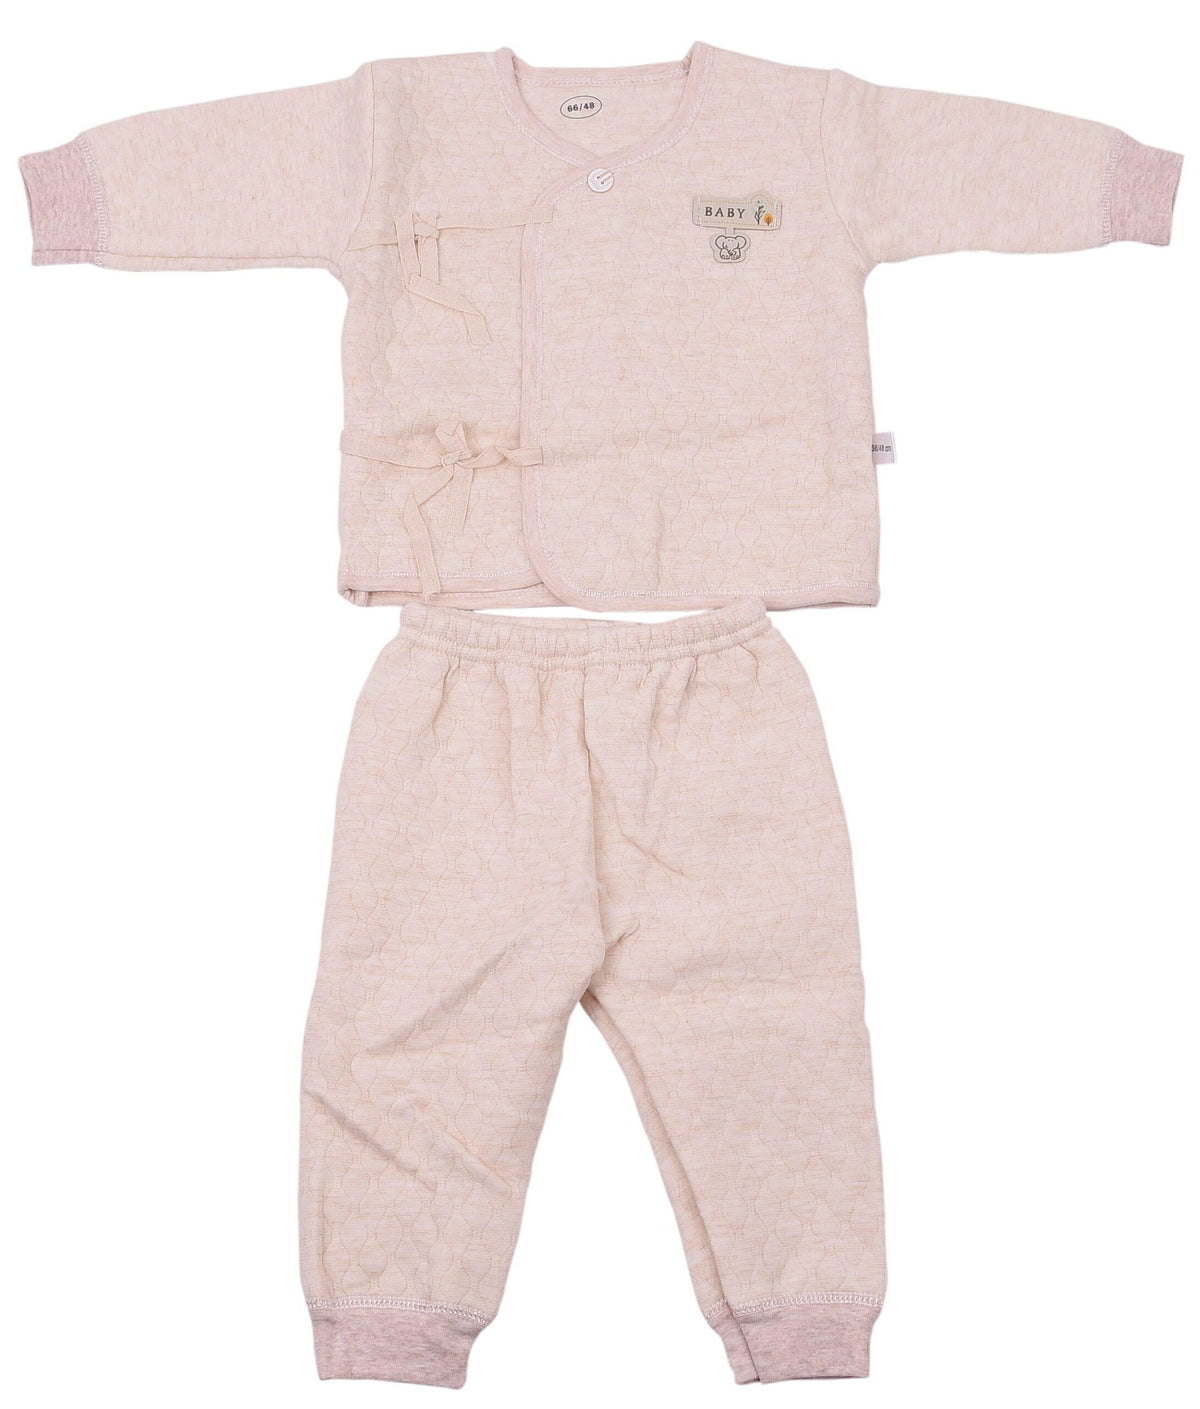 Baby's Warm Unisex Cotton Pant and Shirt Set - Peach